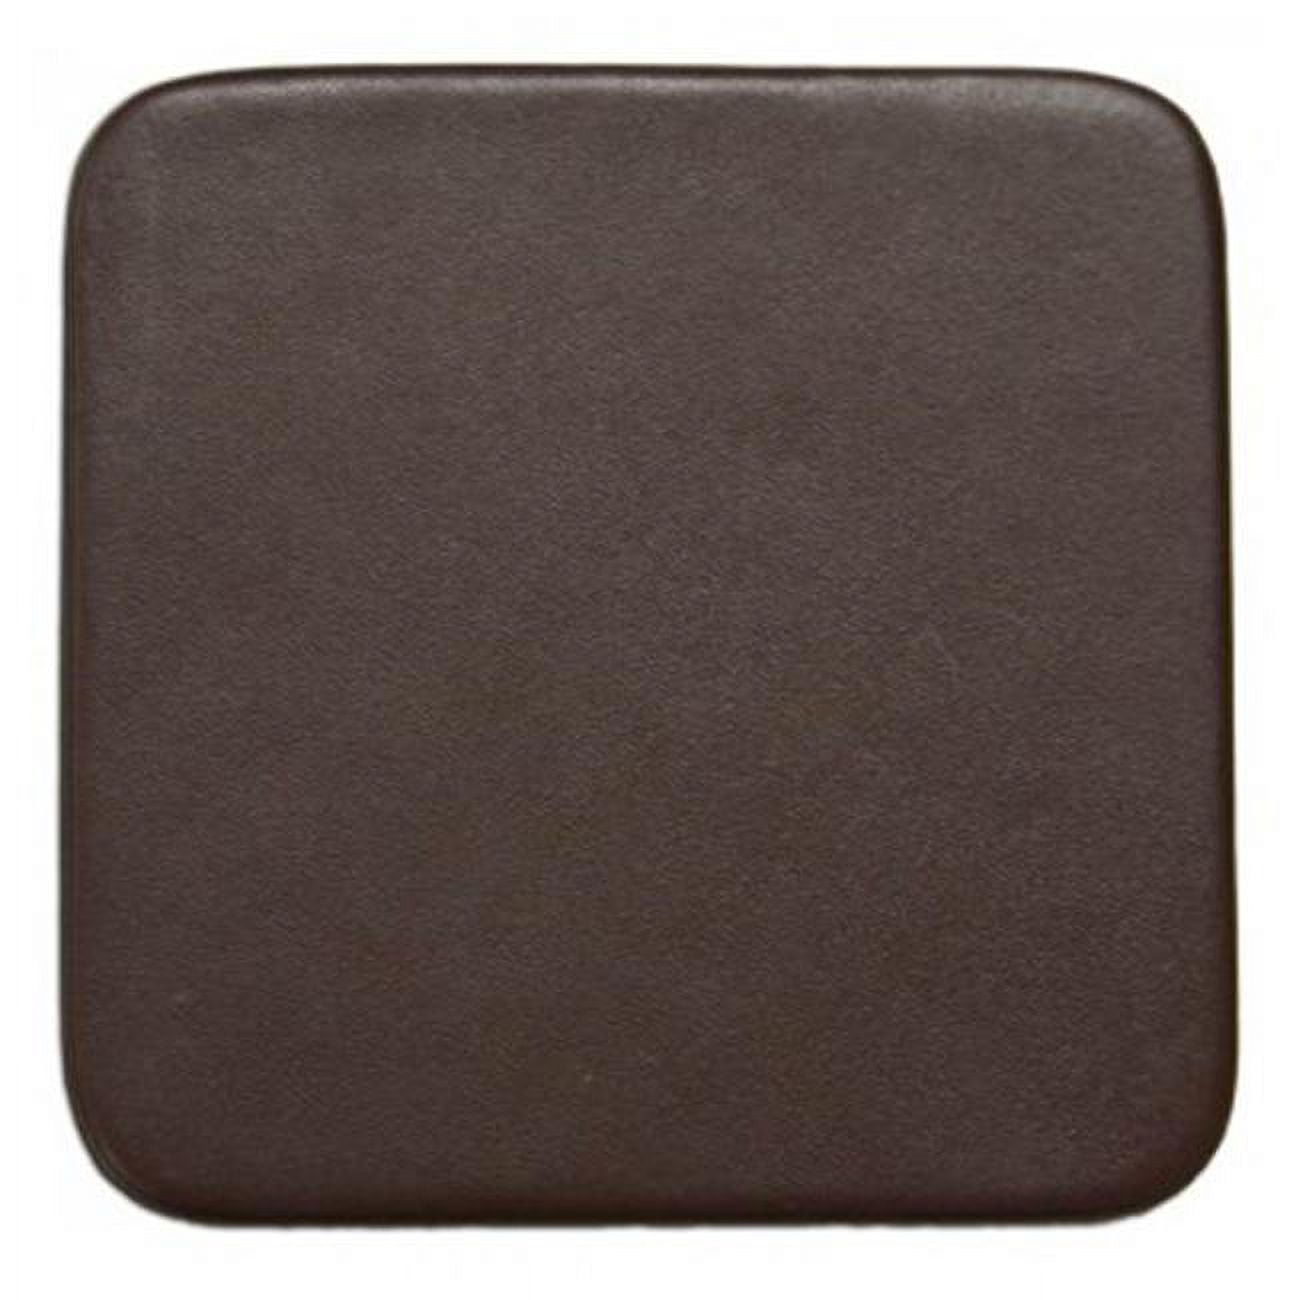 A3455 Chocolate Brown Leatherette Square Coaster